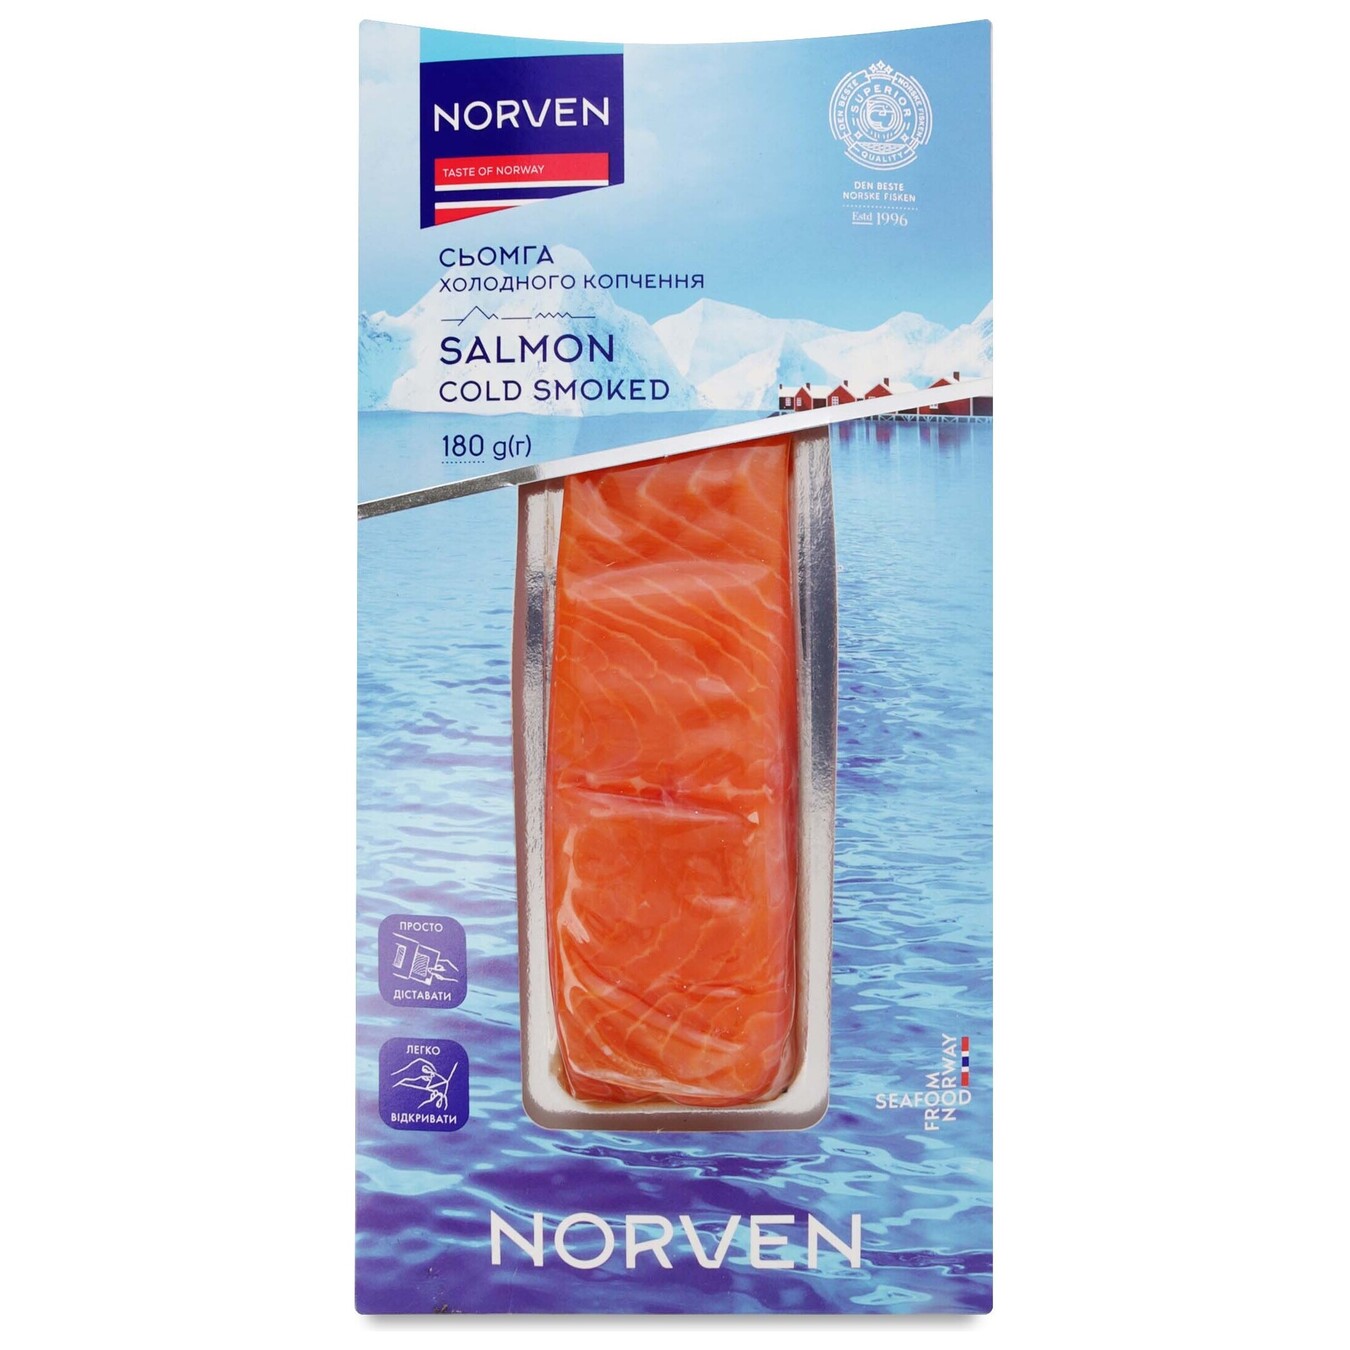 Norven cold-smoked salmon fillet-pieces 180g